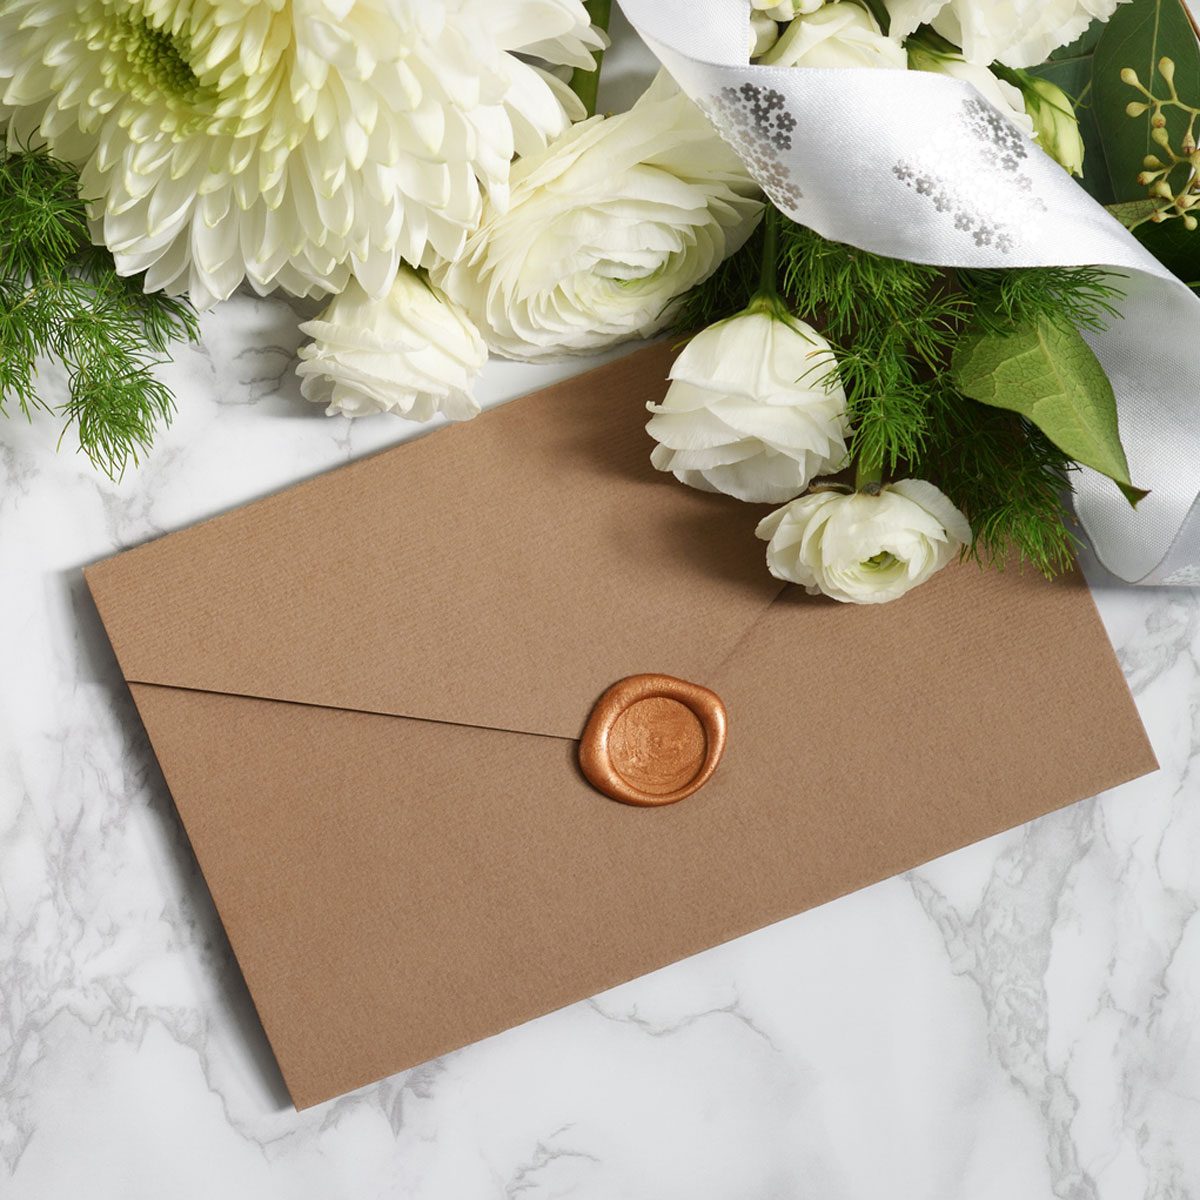 Beautiful Arrangement Of Envelope Ribbon And White Flowers